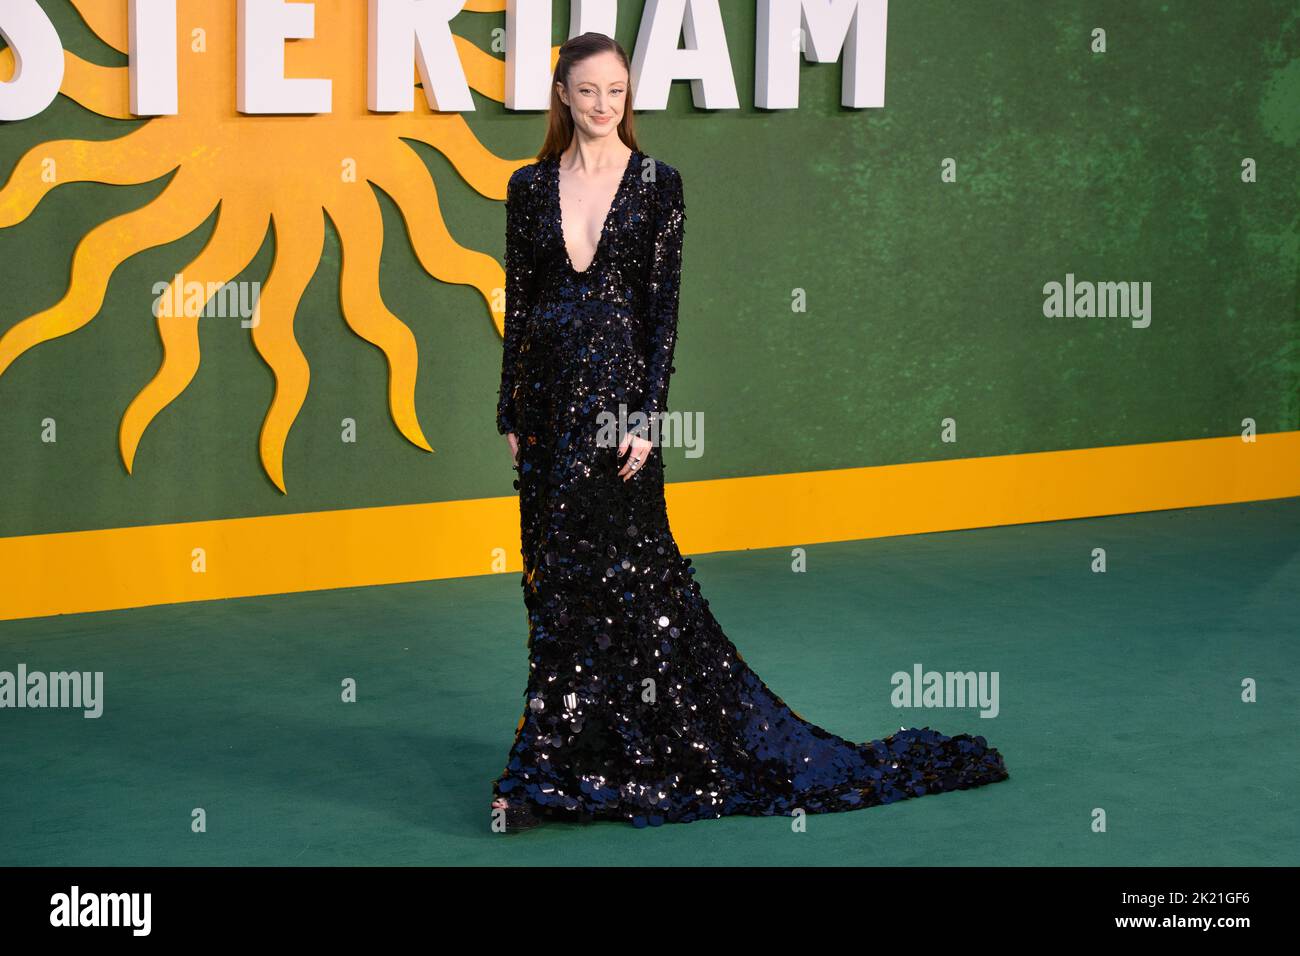 London, UK. 22 September 2022. Andrea Riseborough attending the European premiere of Amsterdam at the Odeon Luxe Leicester Square Cinema, London Picture date: Thursday September 22, 2022. Photo credit should read: Matt Crossick/Empics/Alamy Live News Stock Photo